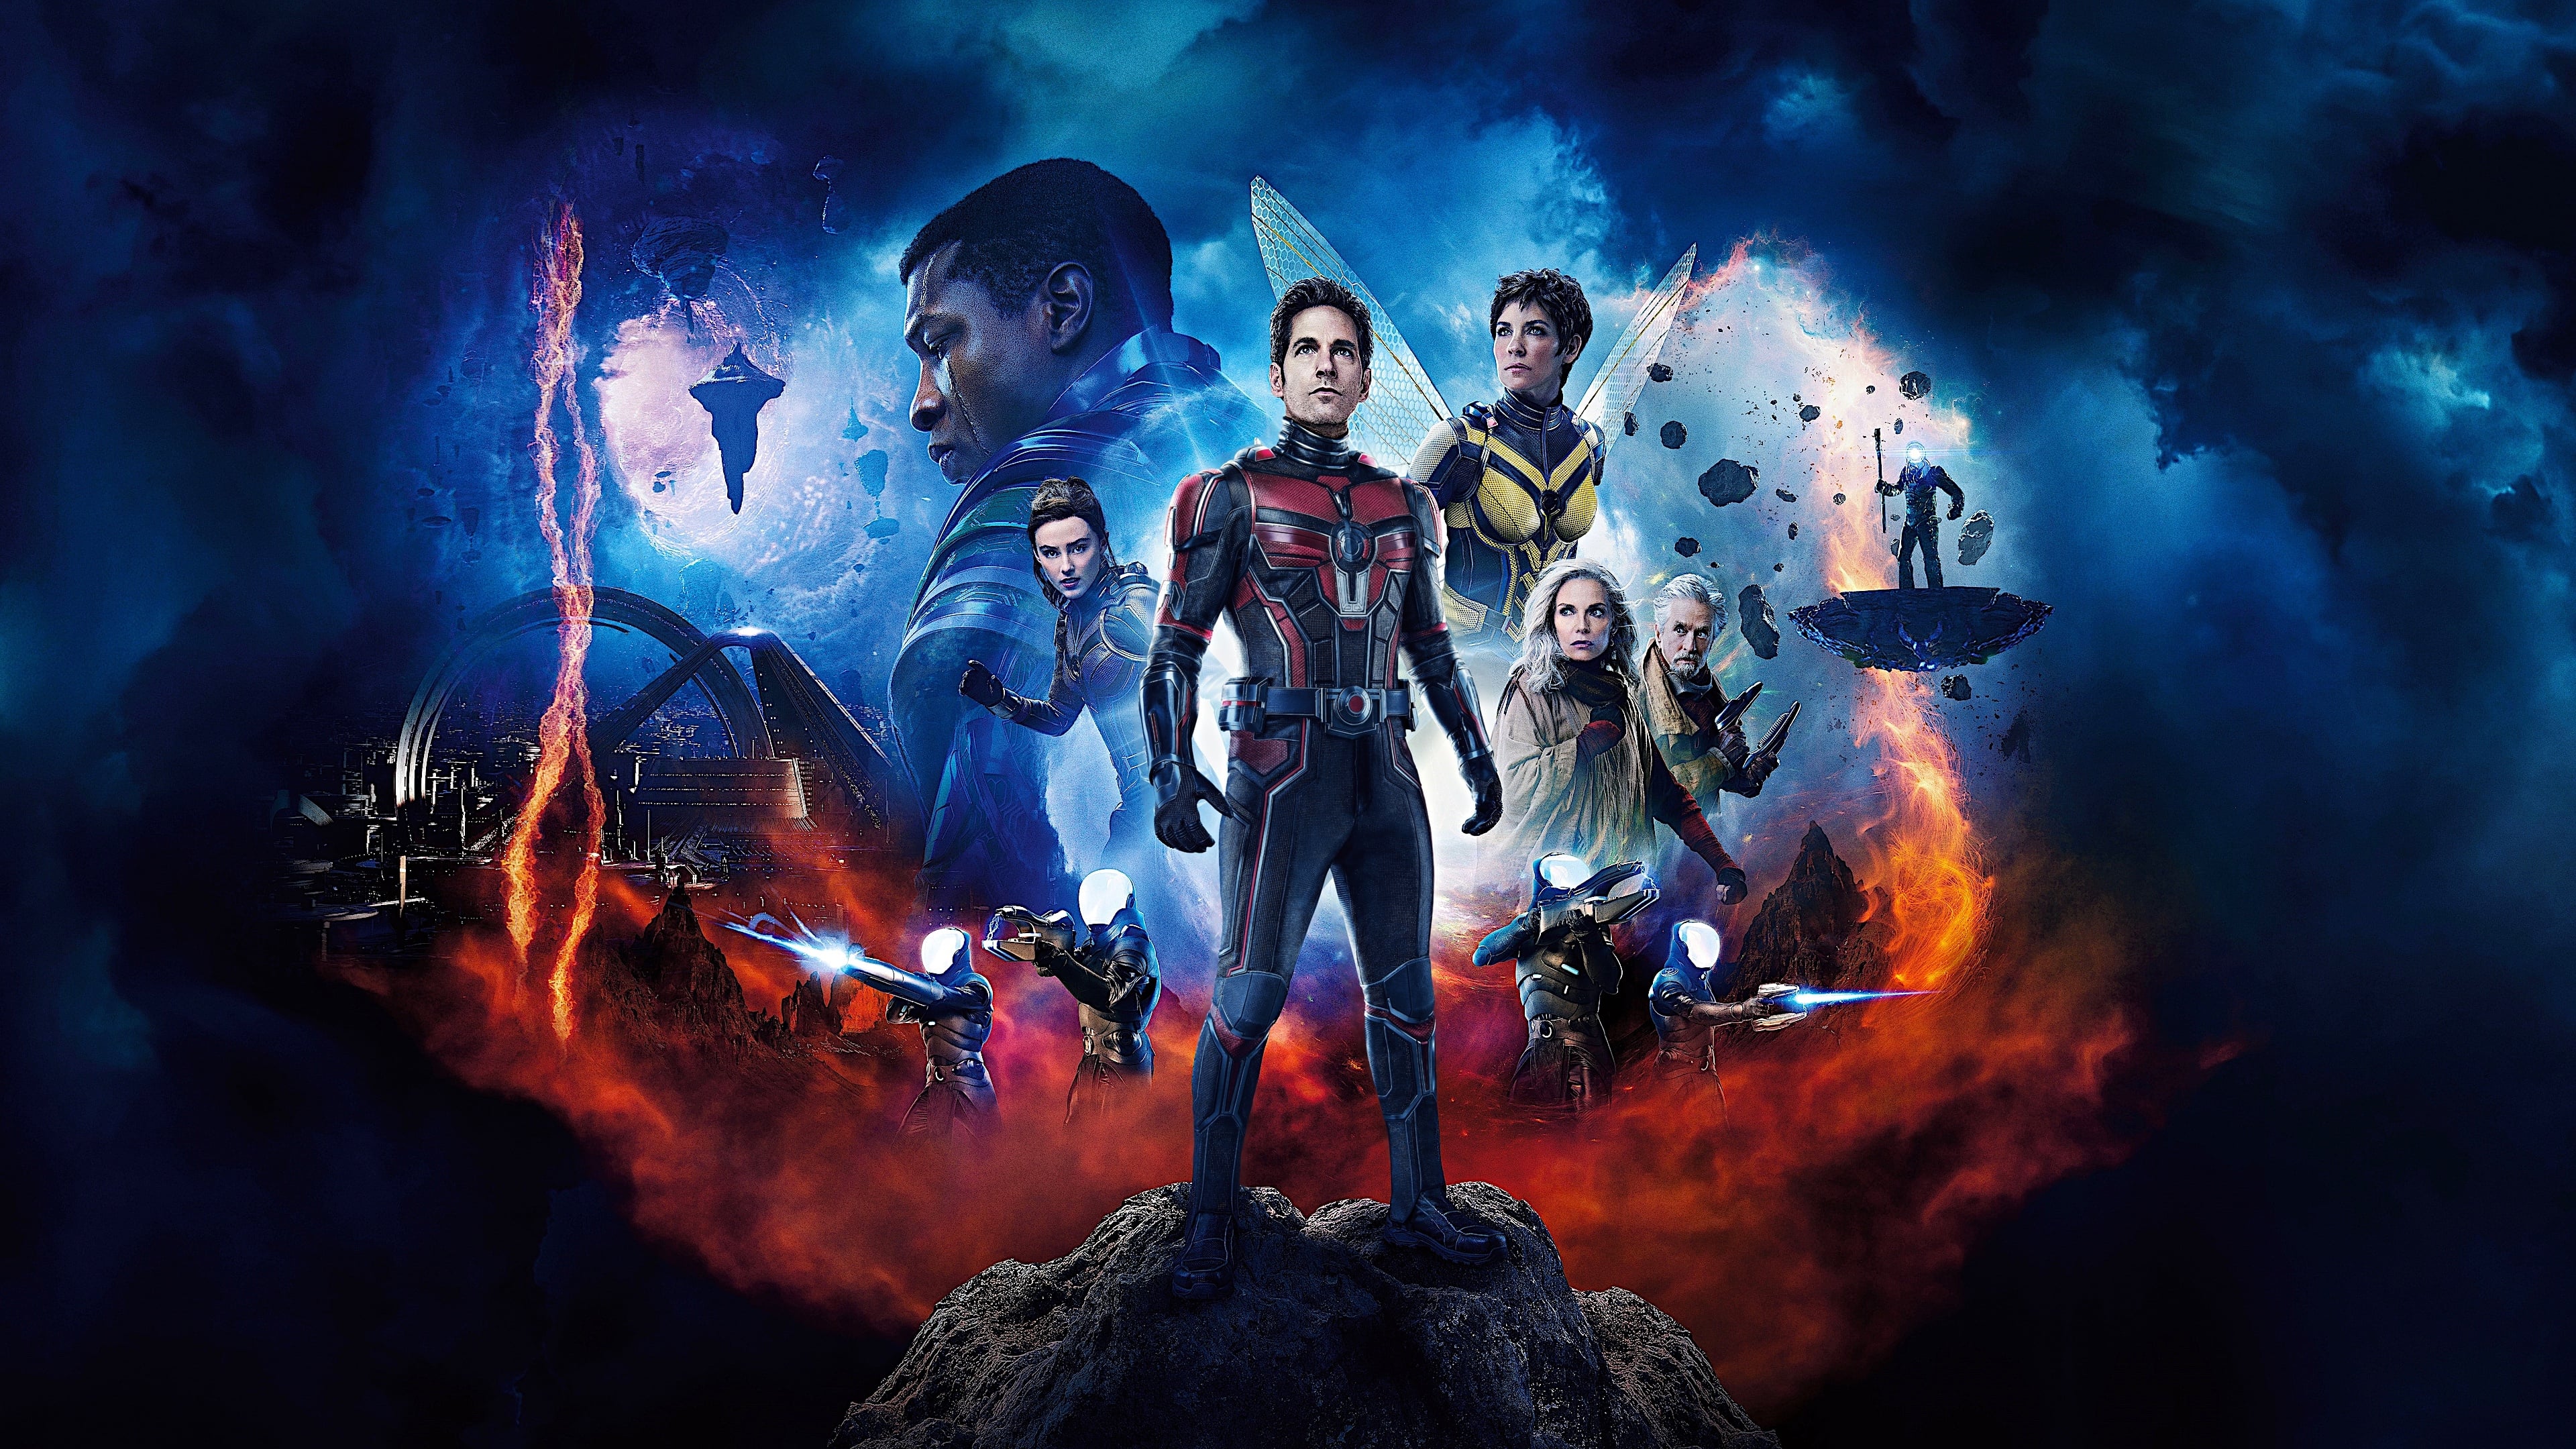 Ant-Man and the Wasp: Quantumania Streaming Online